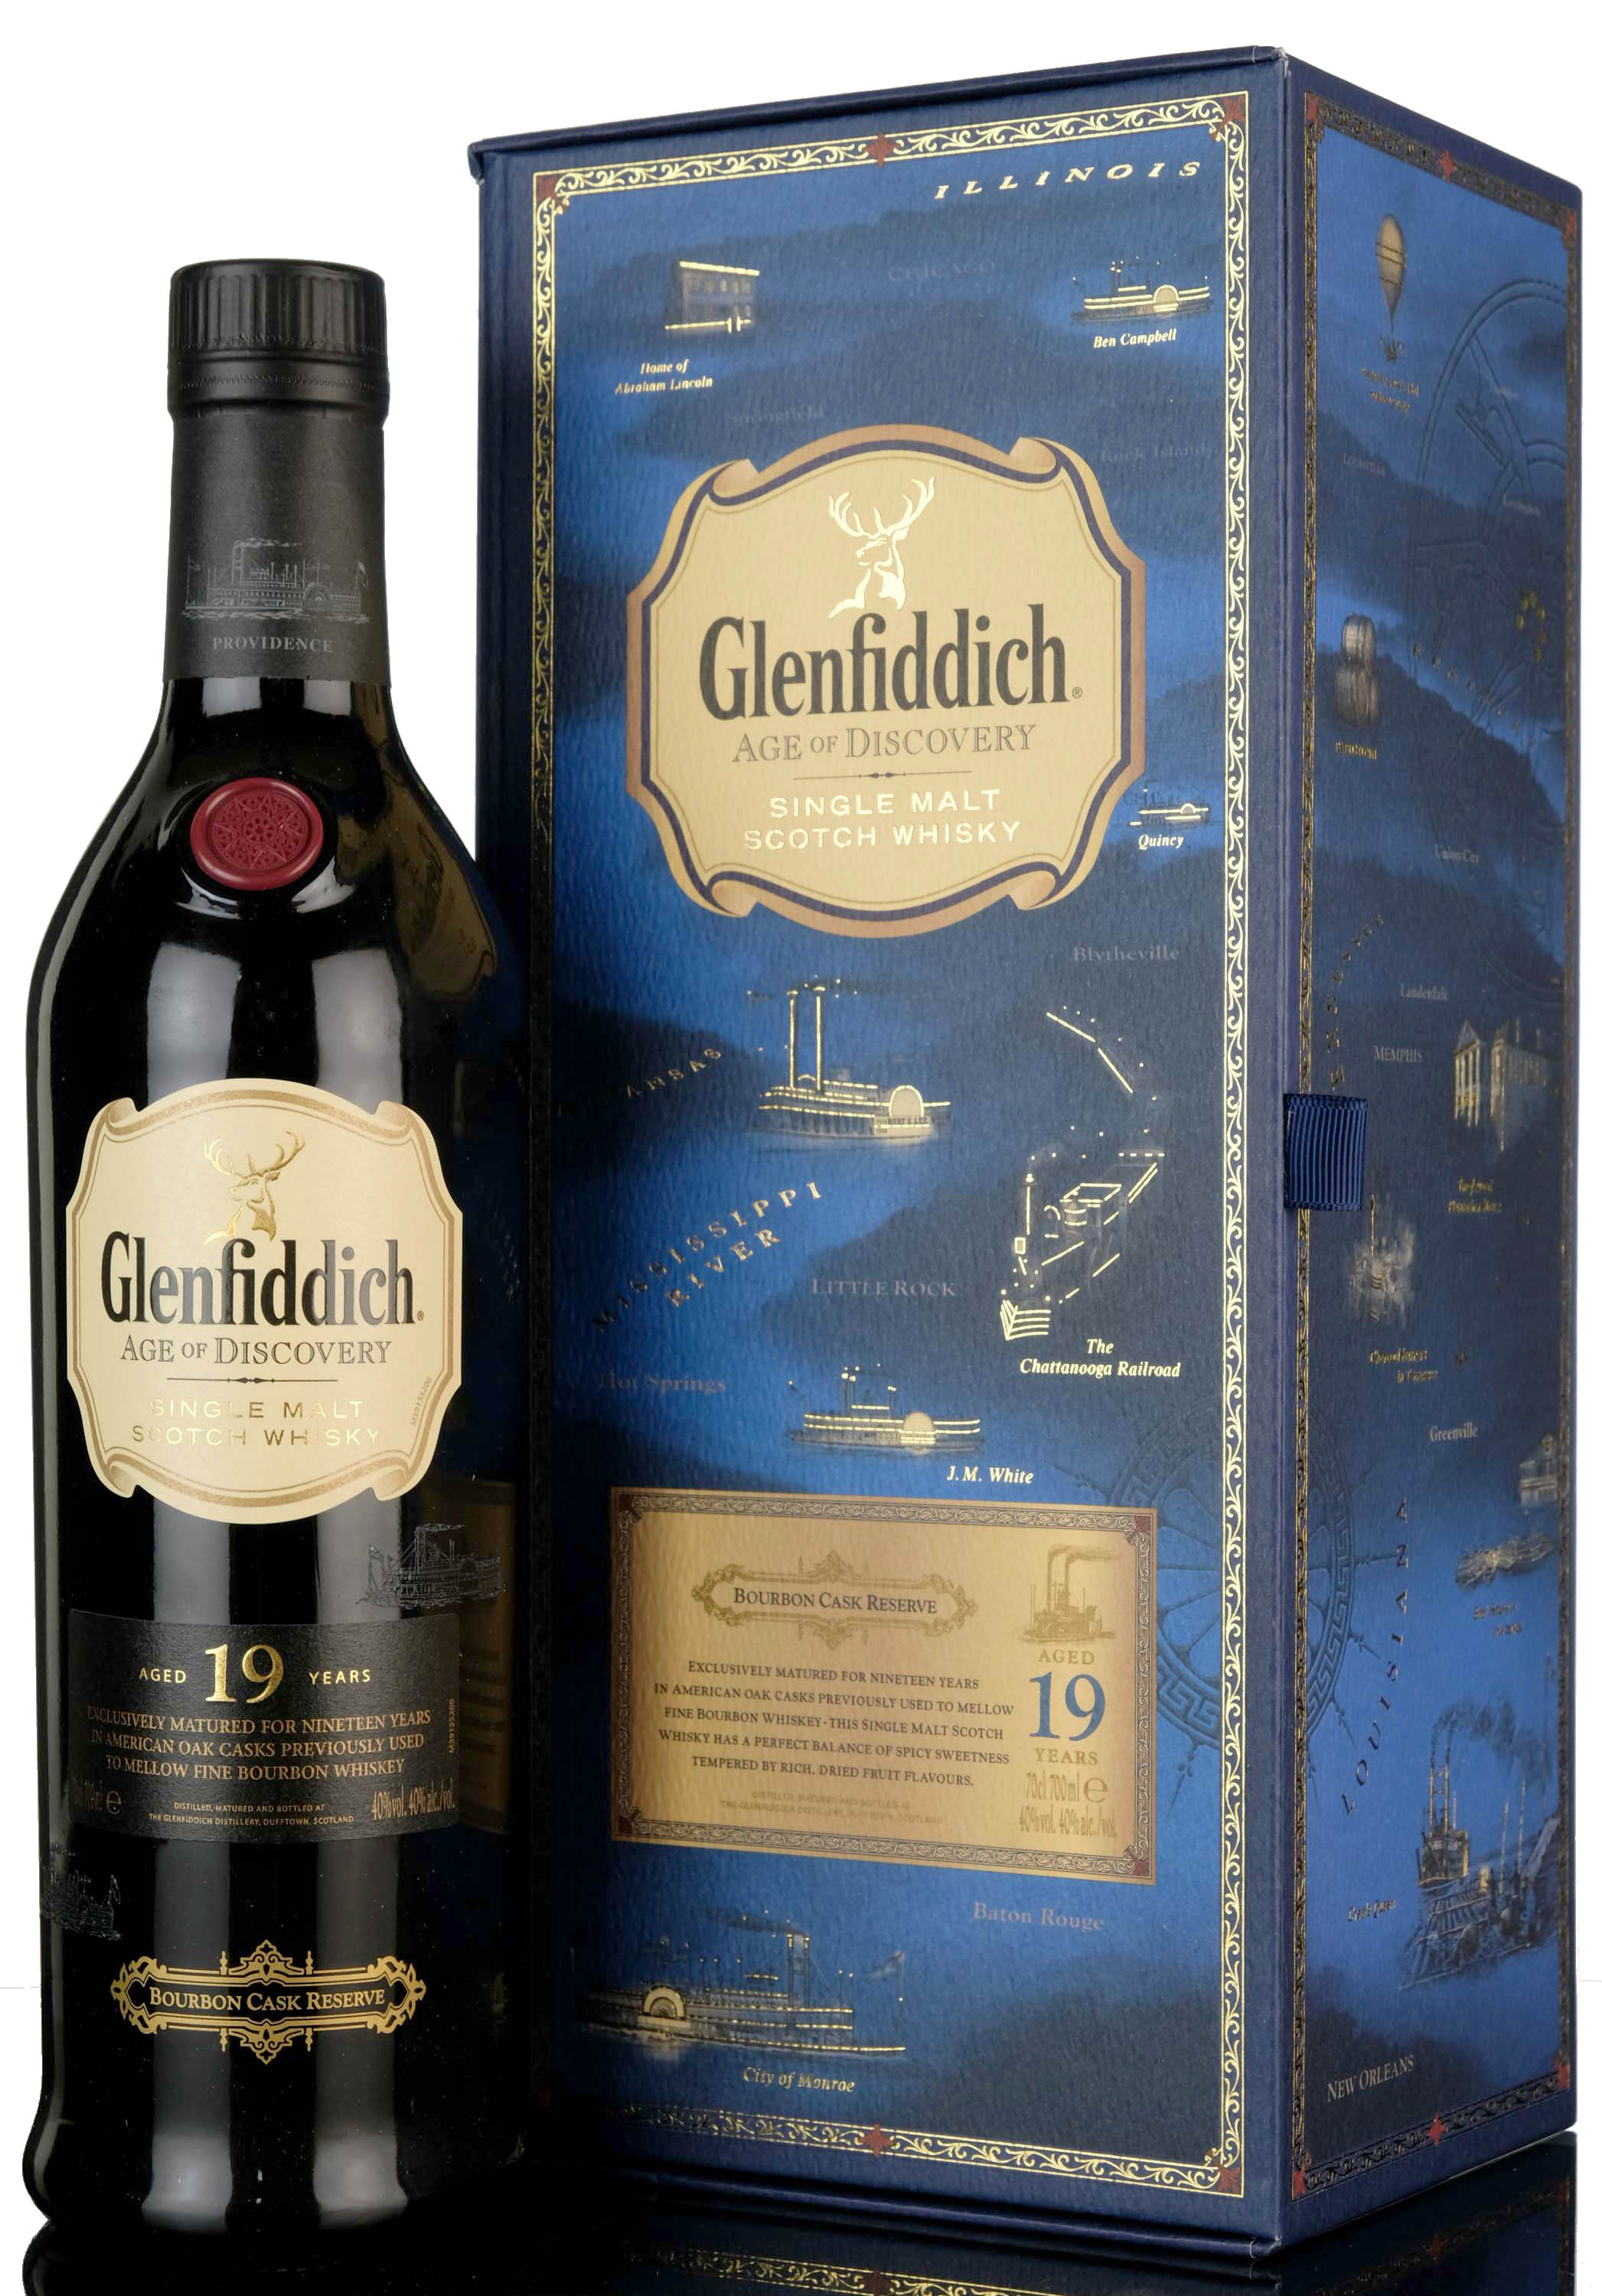 Glenfiddich 19 Year Old - Age Of Discovery - Bourbon Cask Finish